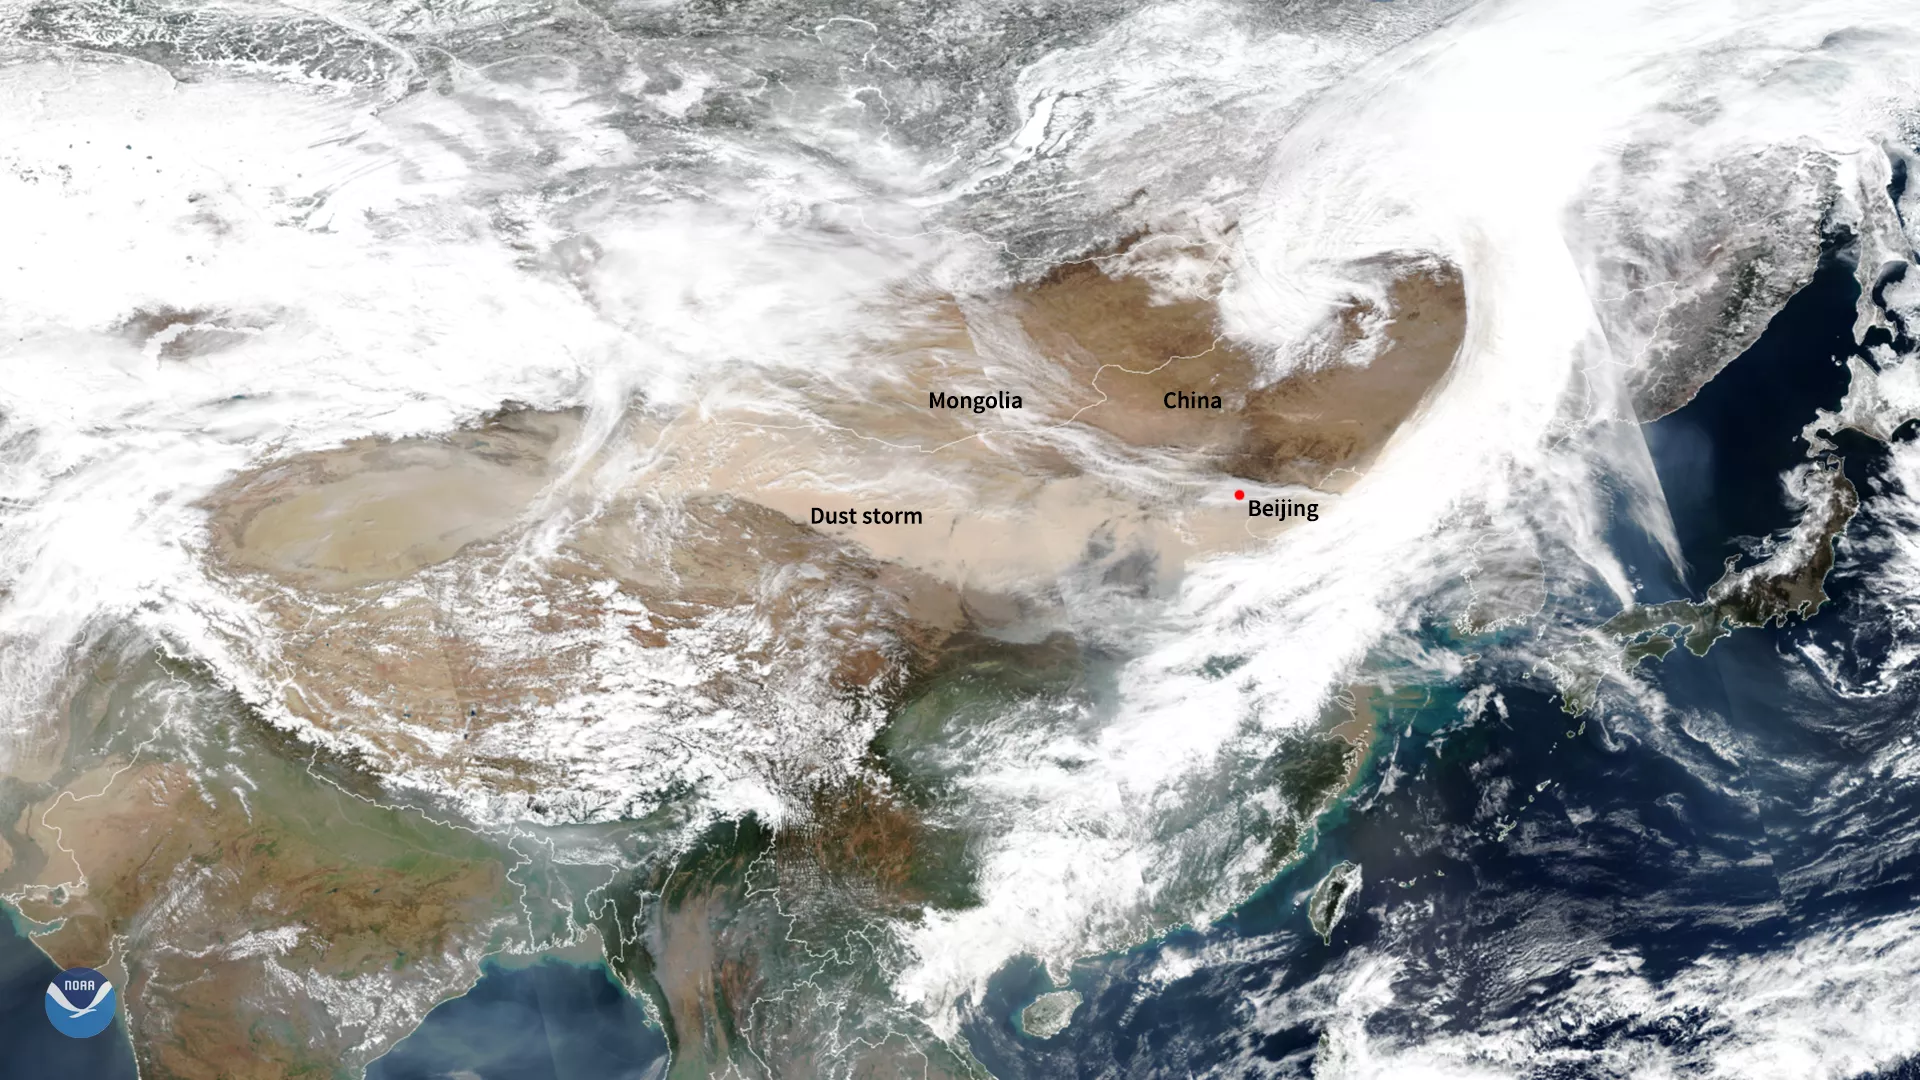 POES TrueColor imagery of dust storm in Asia, labeling Mongolia, China, and Beijing.